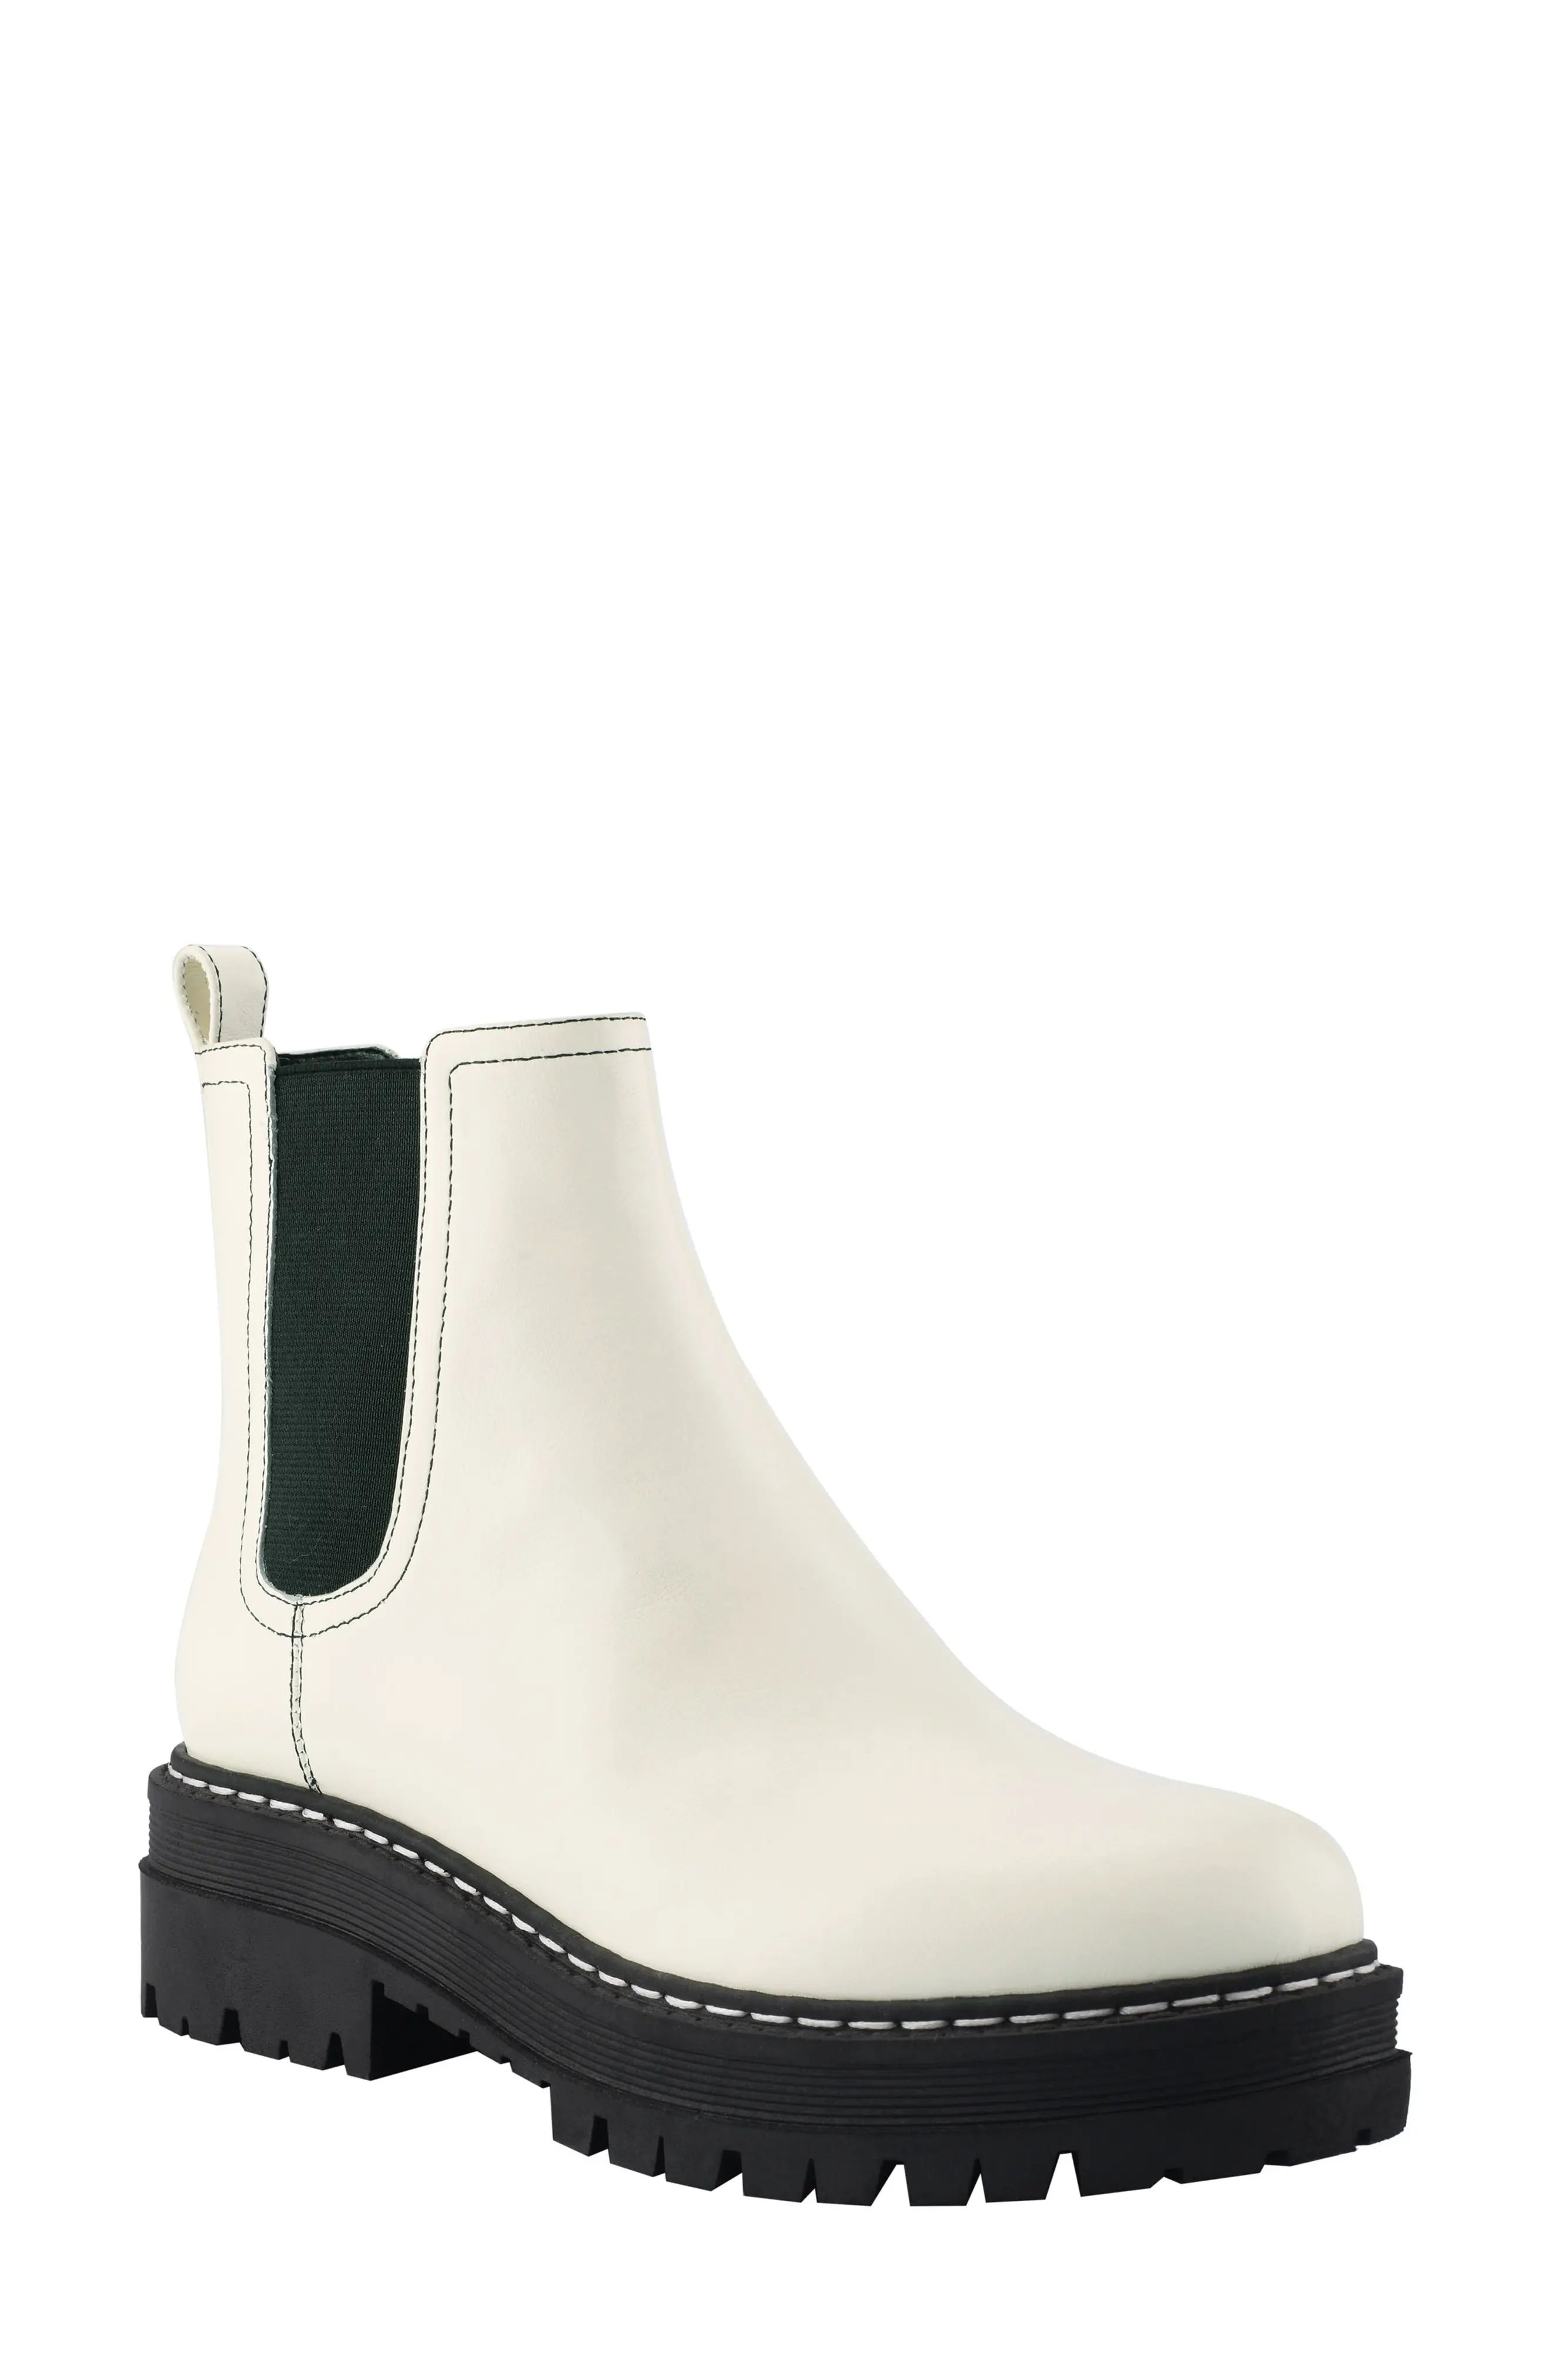 Marc Fisher LTD Padmia Chelsea Boot, Size 6.5 in Chic Cream/Black Leather at Nordstrom | Nordstrom